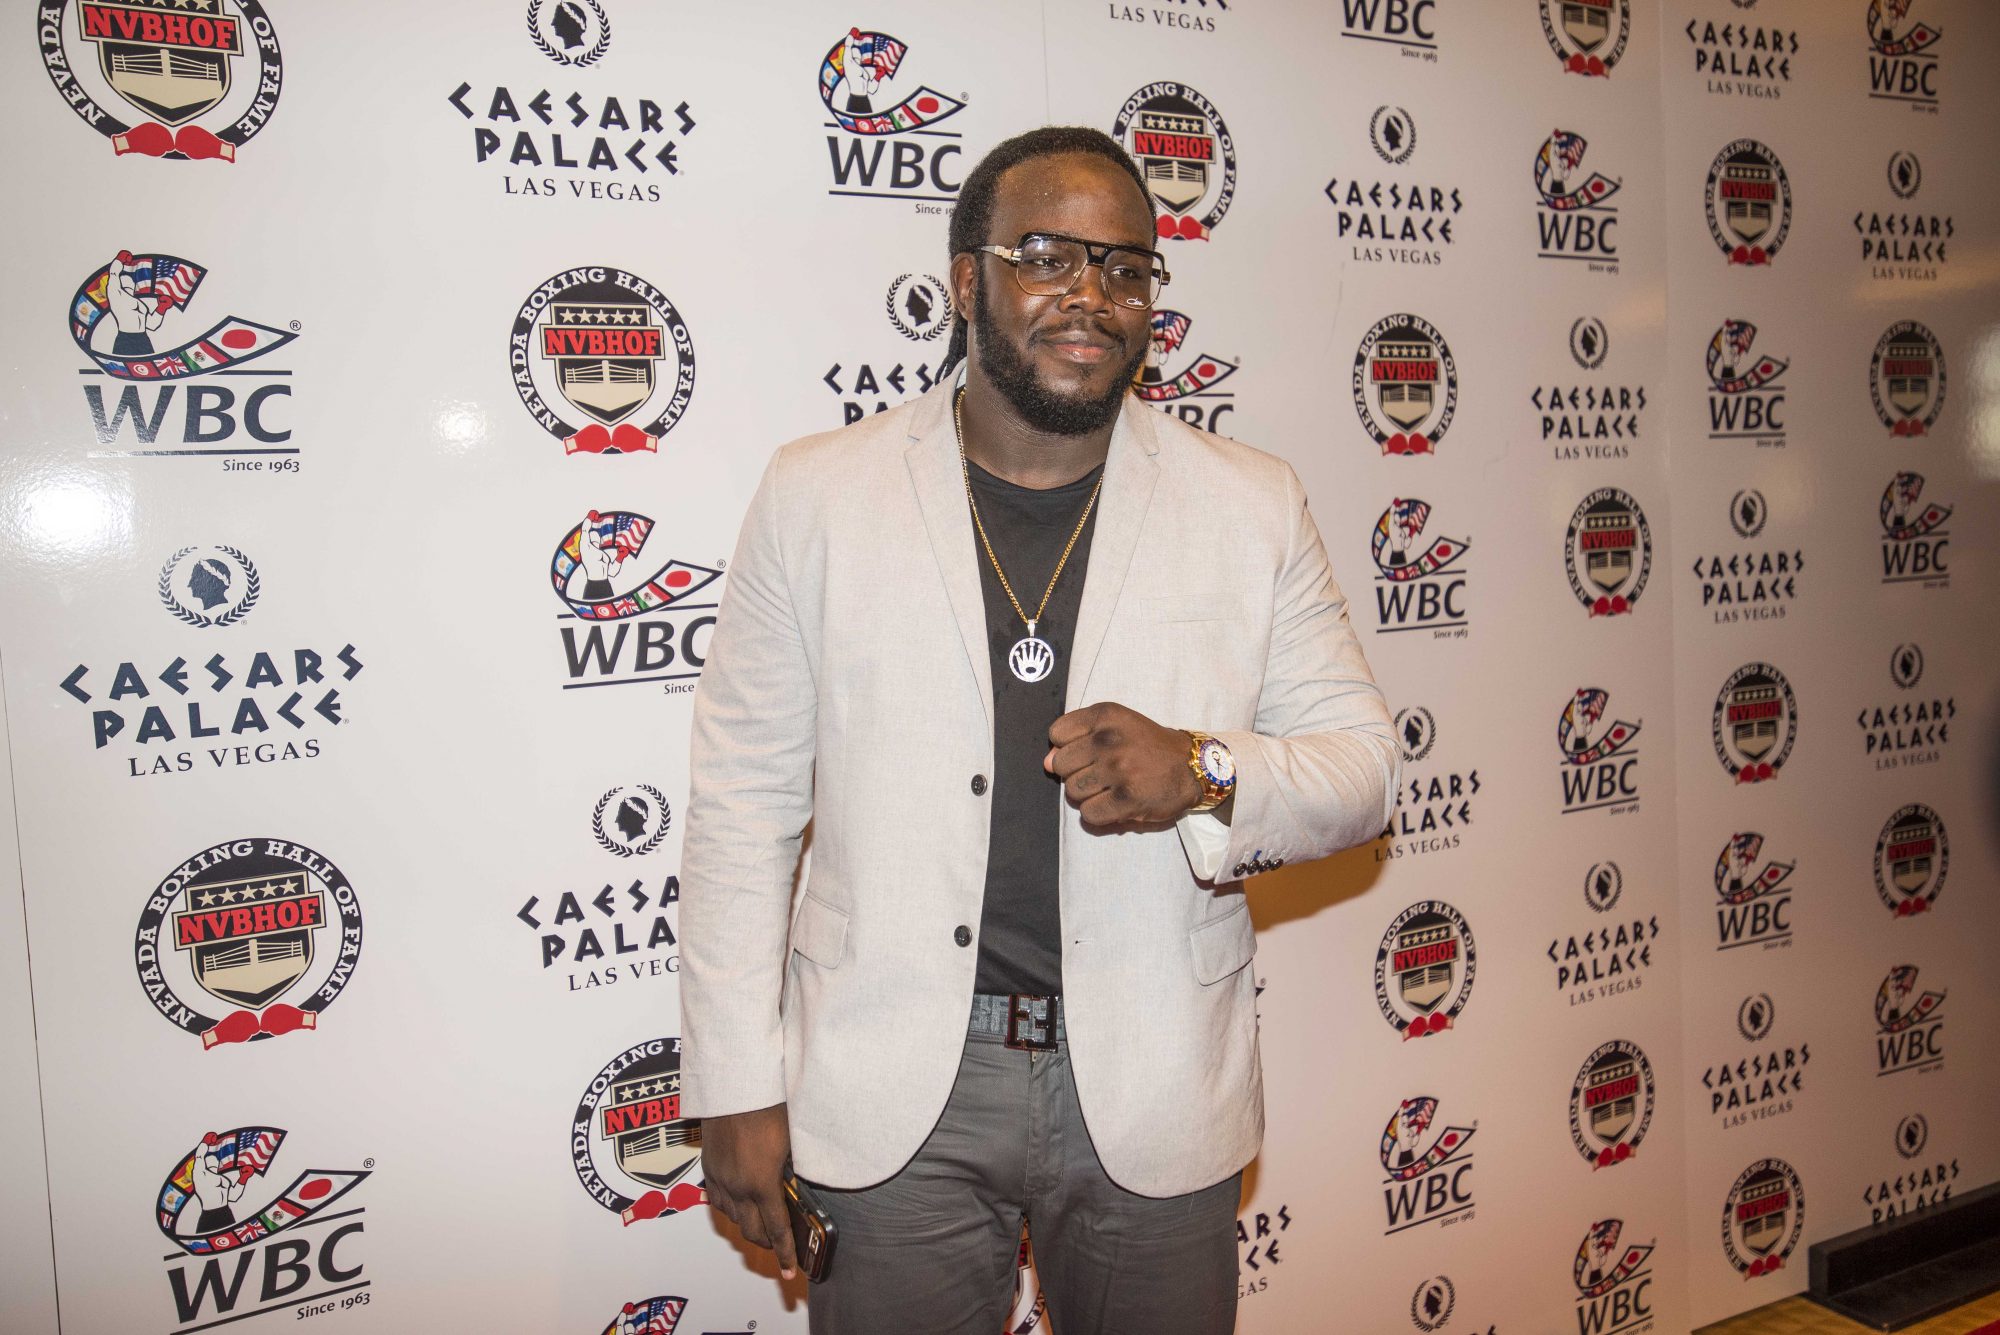 Deontay Wilder ordered to face Bermane Stiverne in rematch for WBC Title 